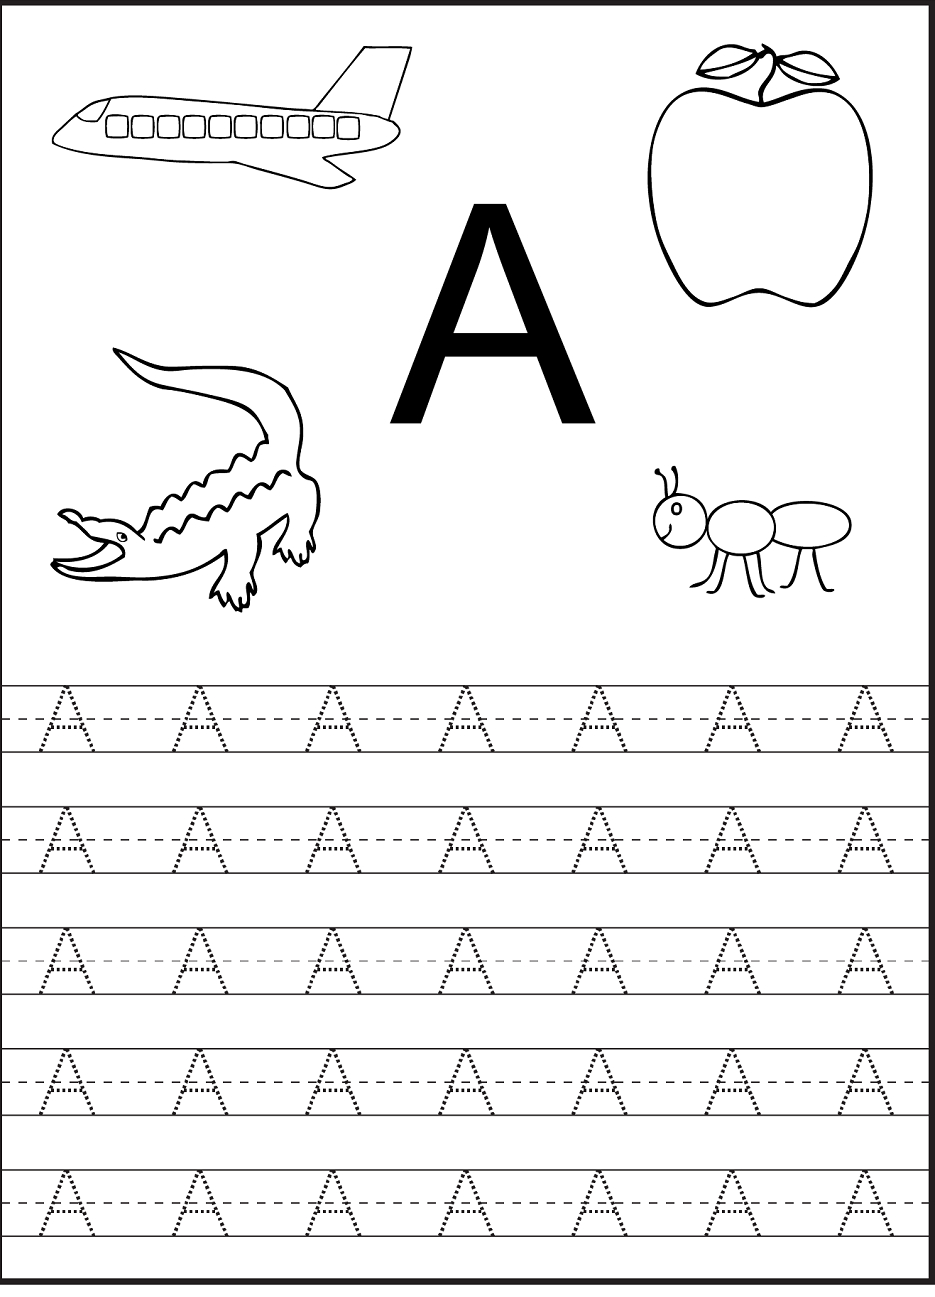 Tracing The Letter A Free Printable | Preschool Worksheets with regard to Free Tracing Letters